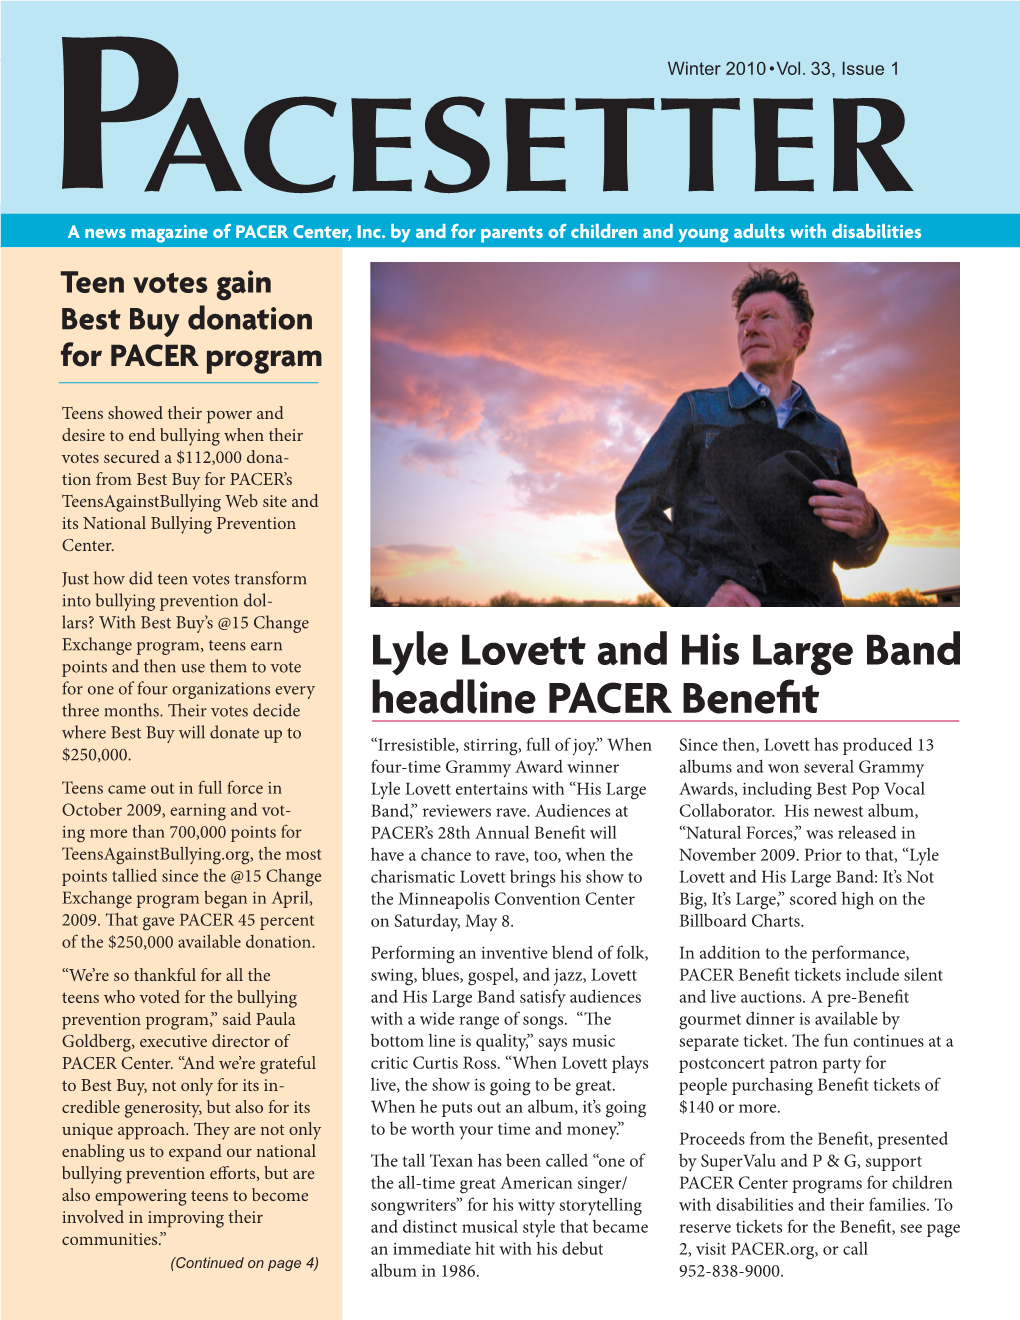 Lyle Lovett and His Large Band Headline PACER Benefit